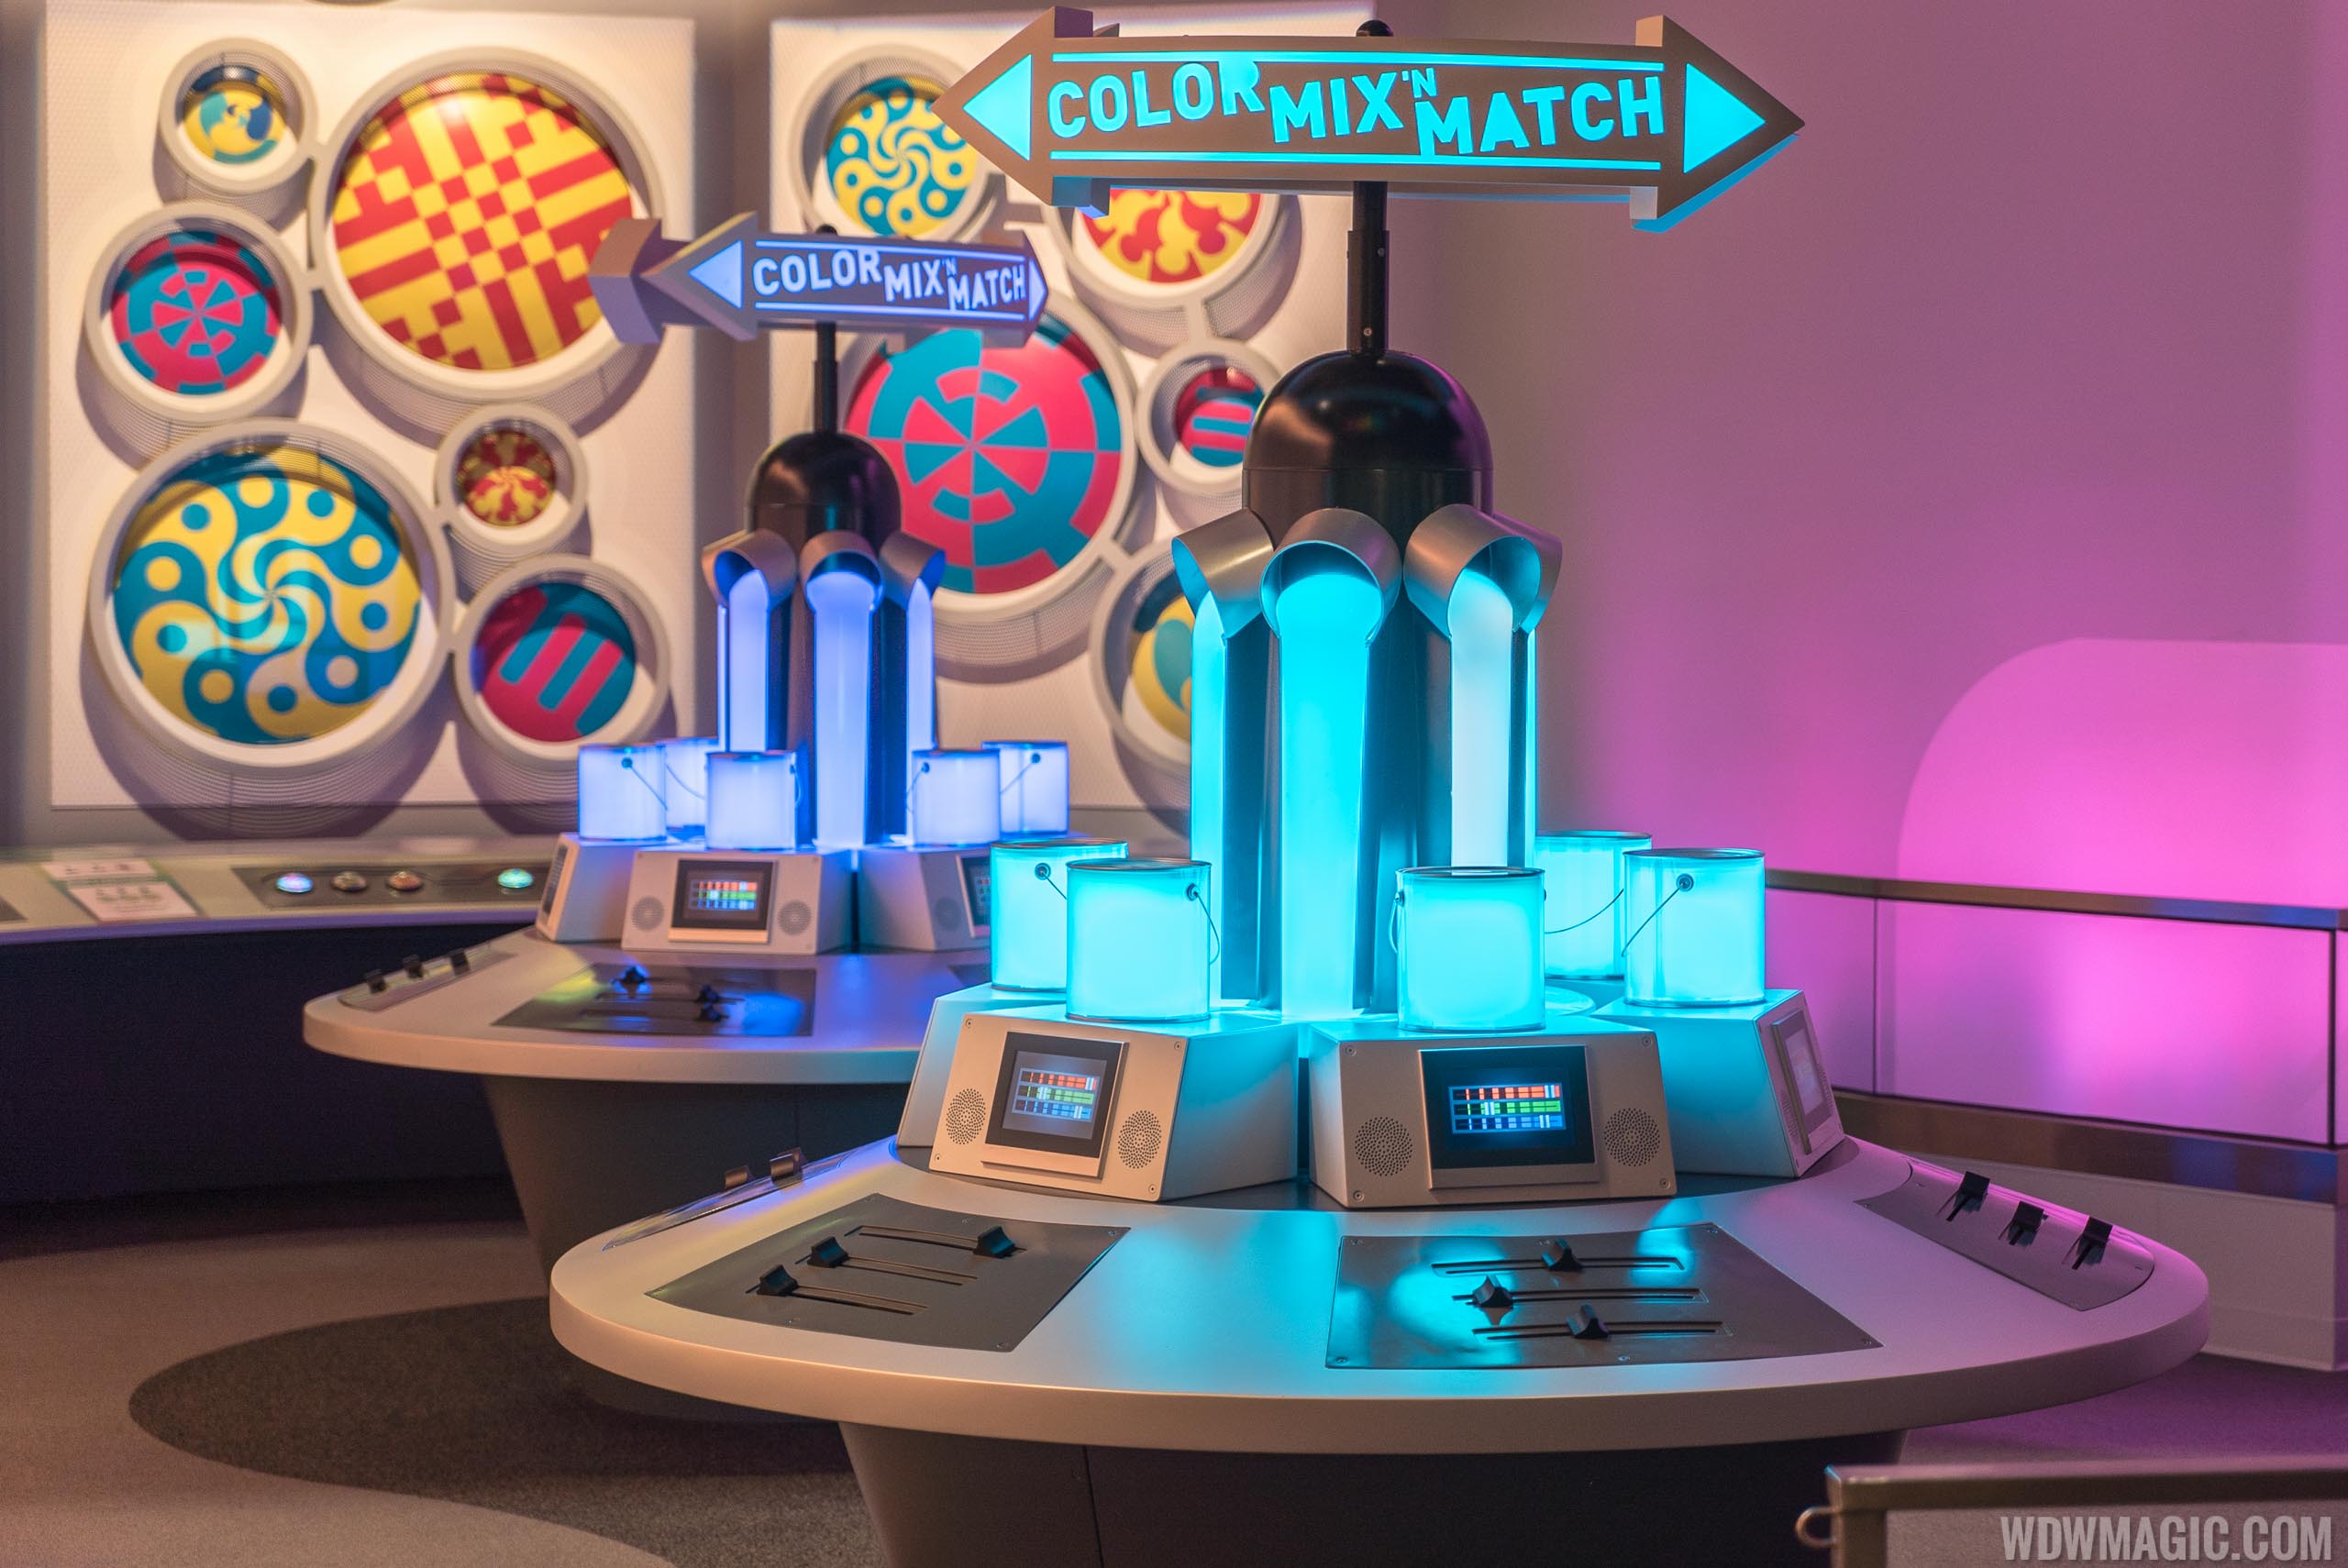 PHOTOS - First look at new Epcot Innoventions exhibit 'Colortopia by